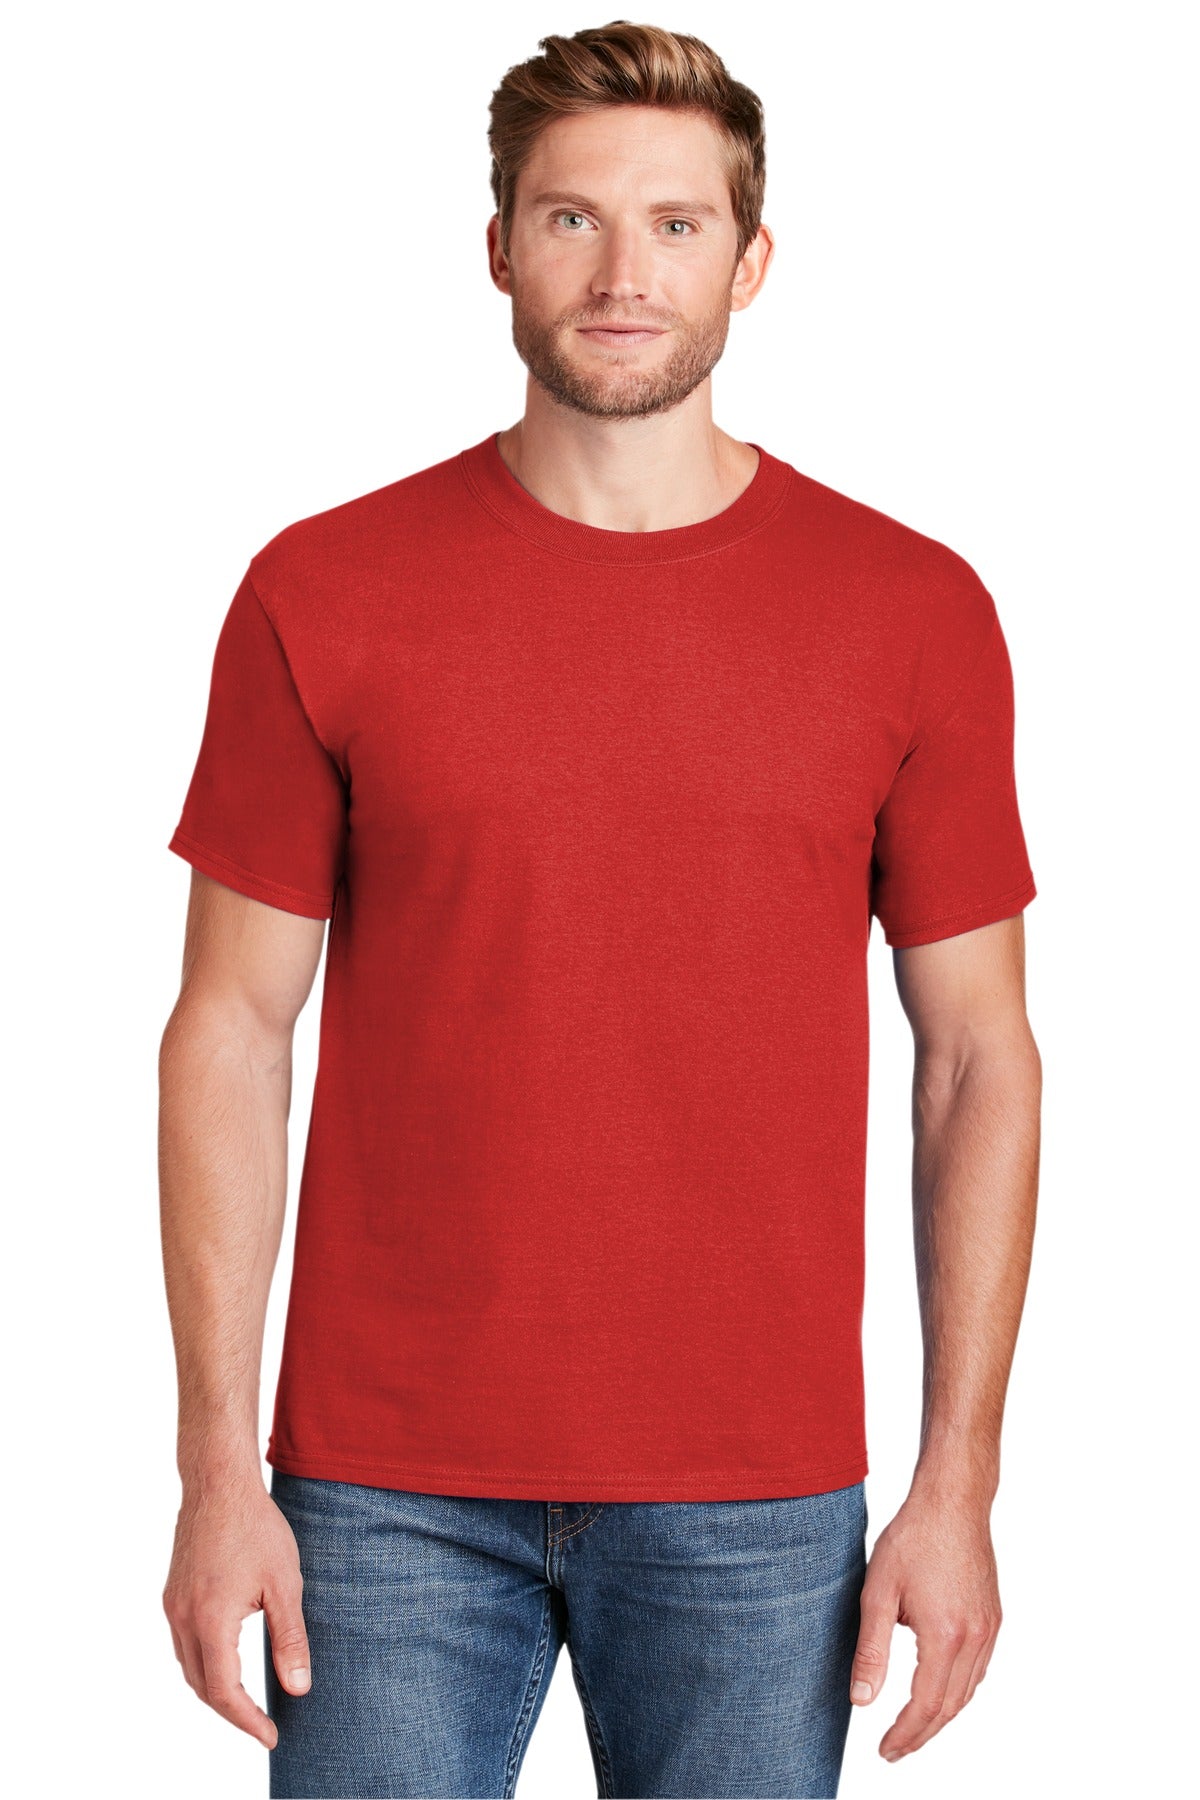 T-Shirts Athletic Red Hanes